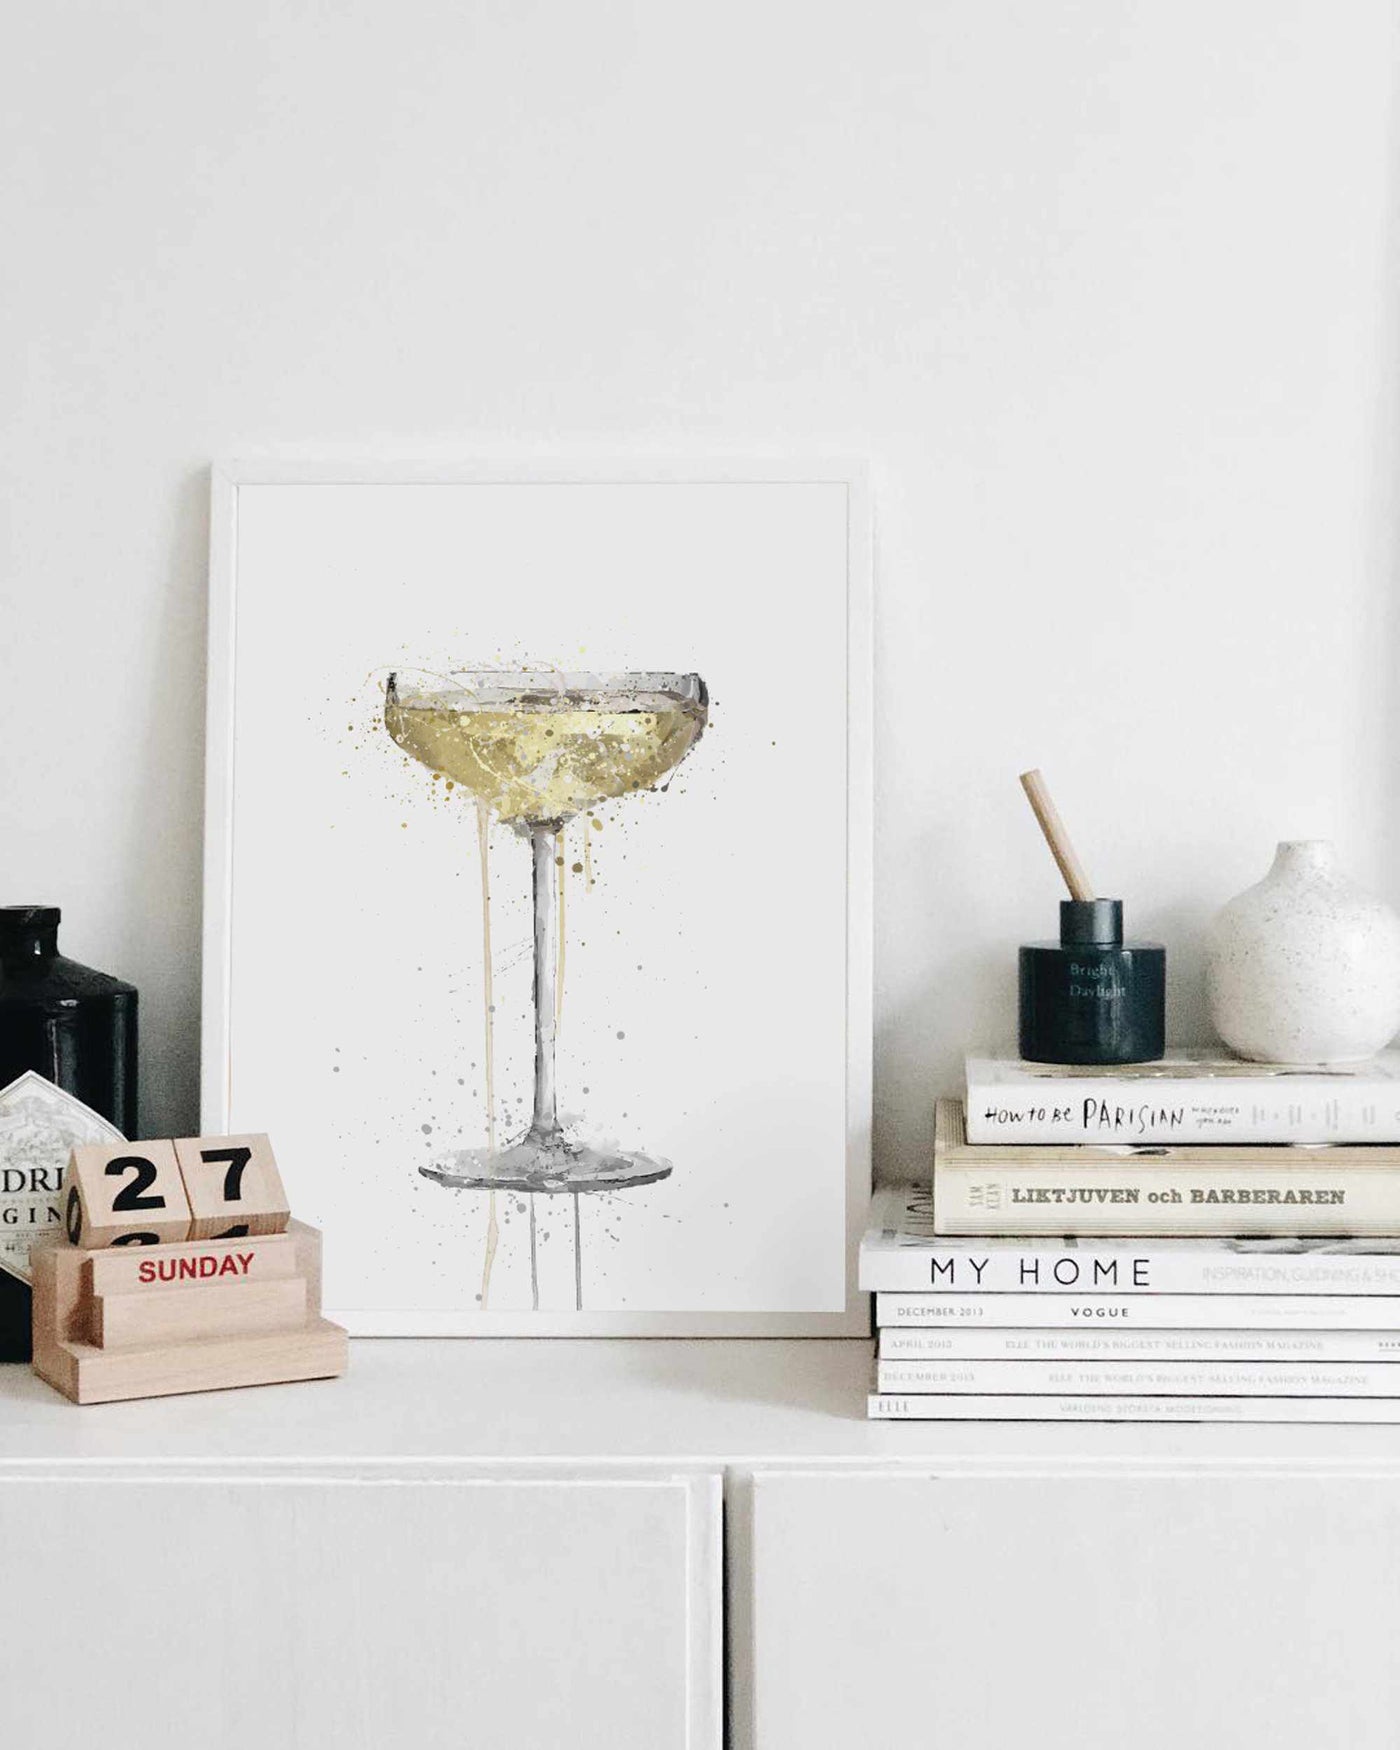 Champagne Coupe Cocktail Wall Art Print